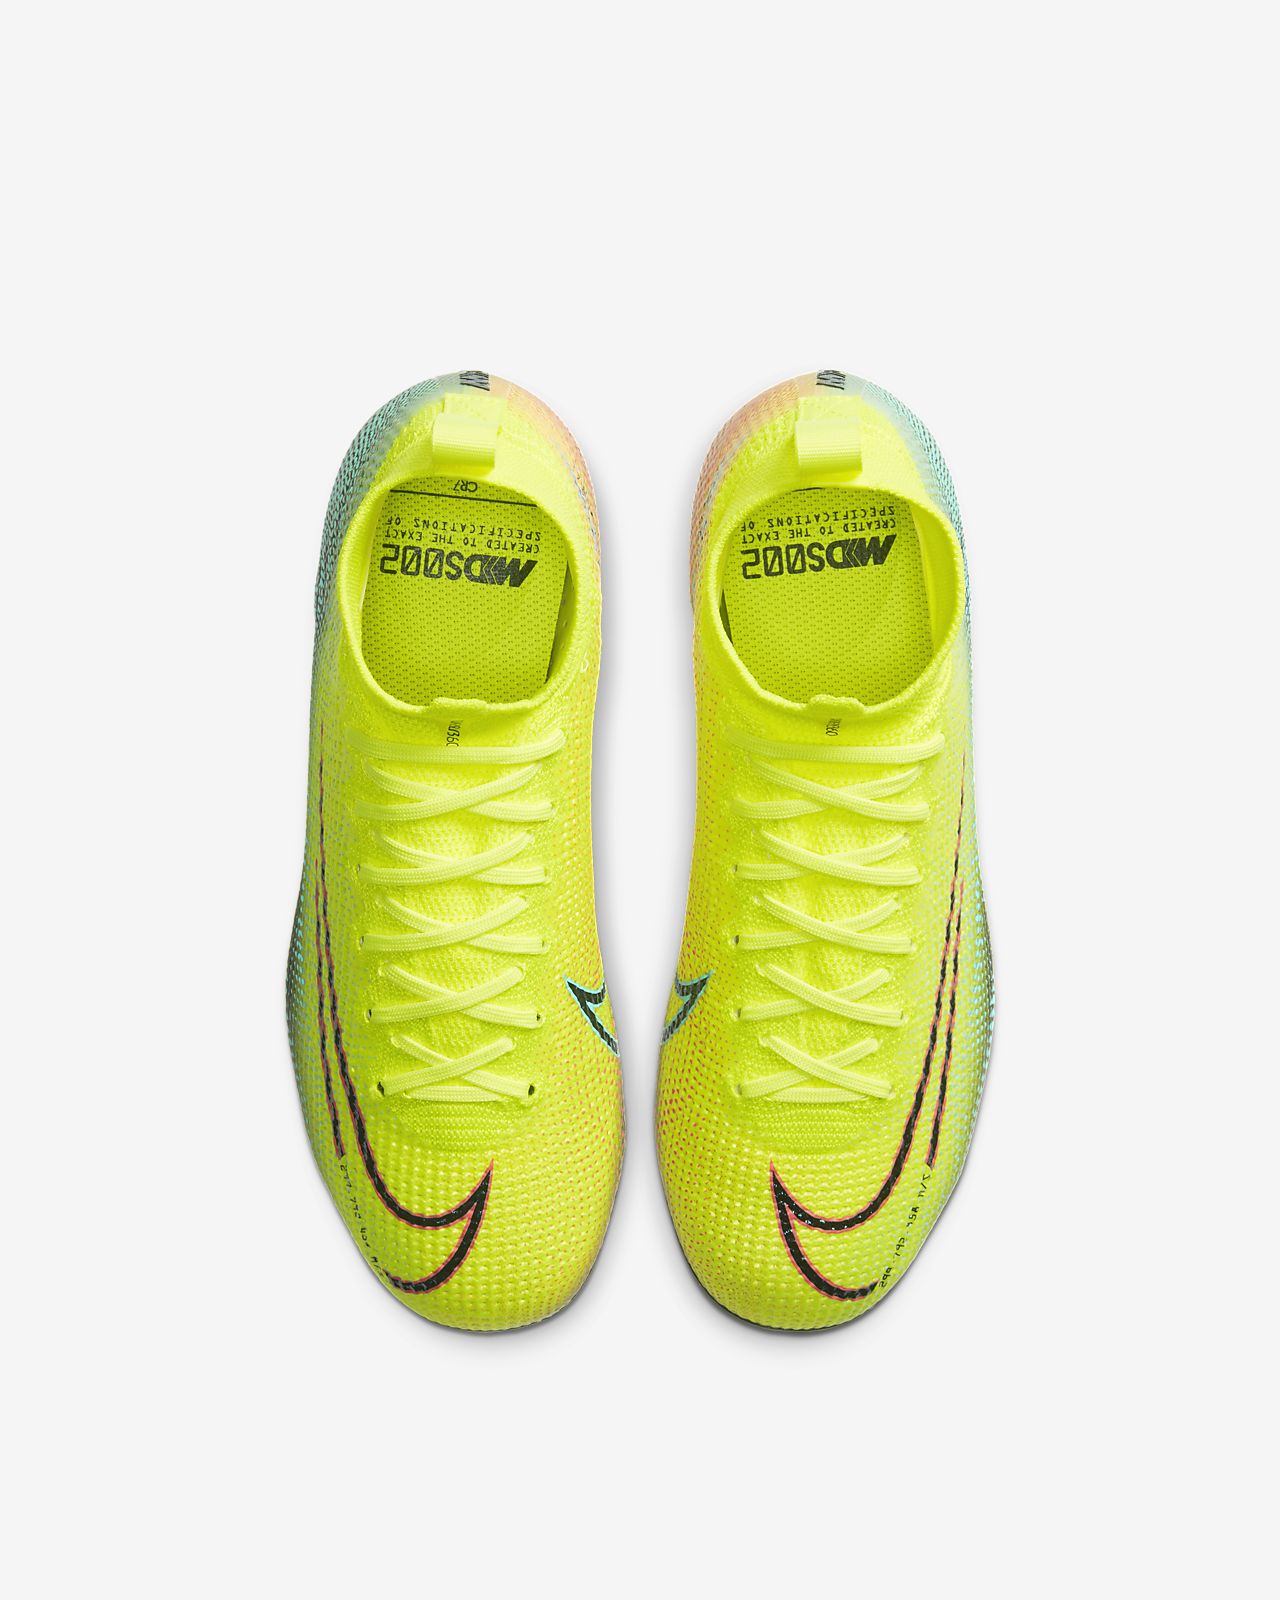 Nike Youth Mercurial Superfly 7 Elite Firm Ground. Amazon